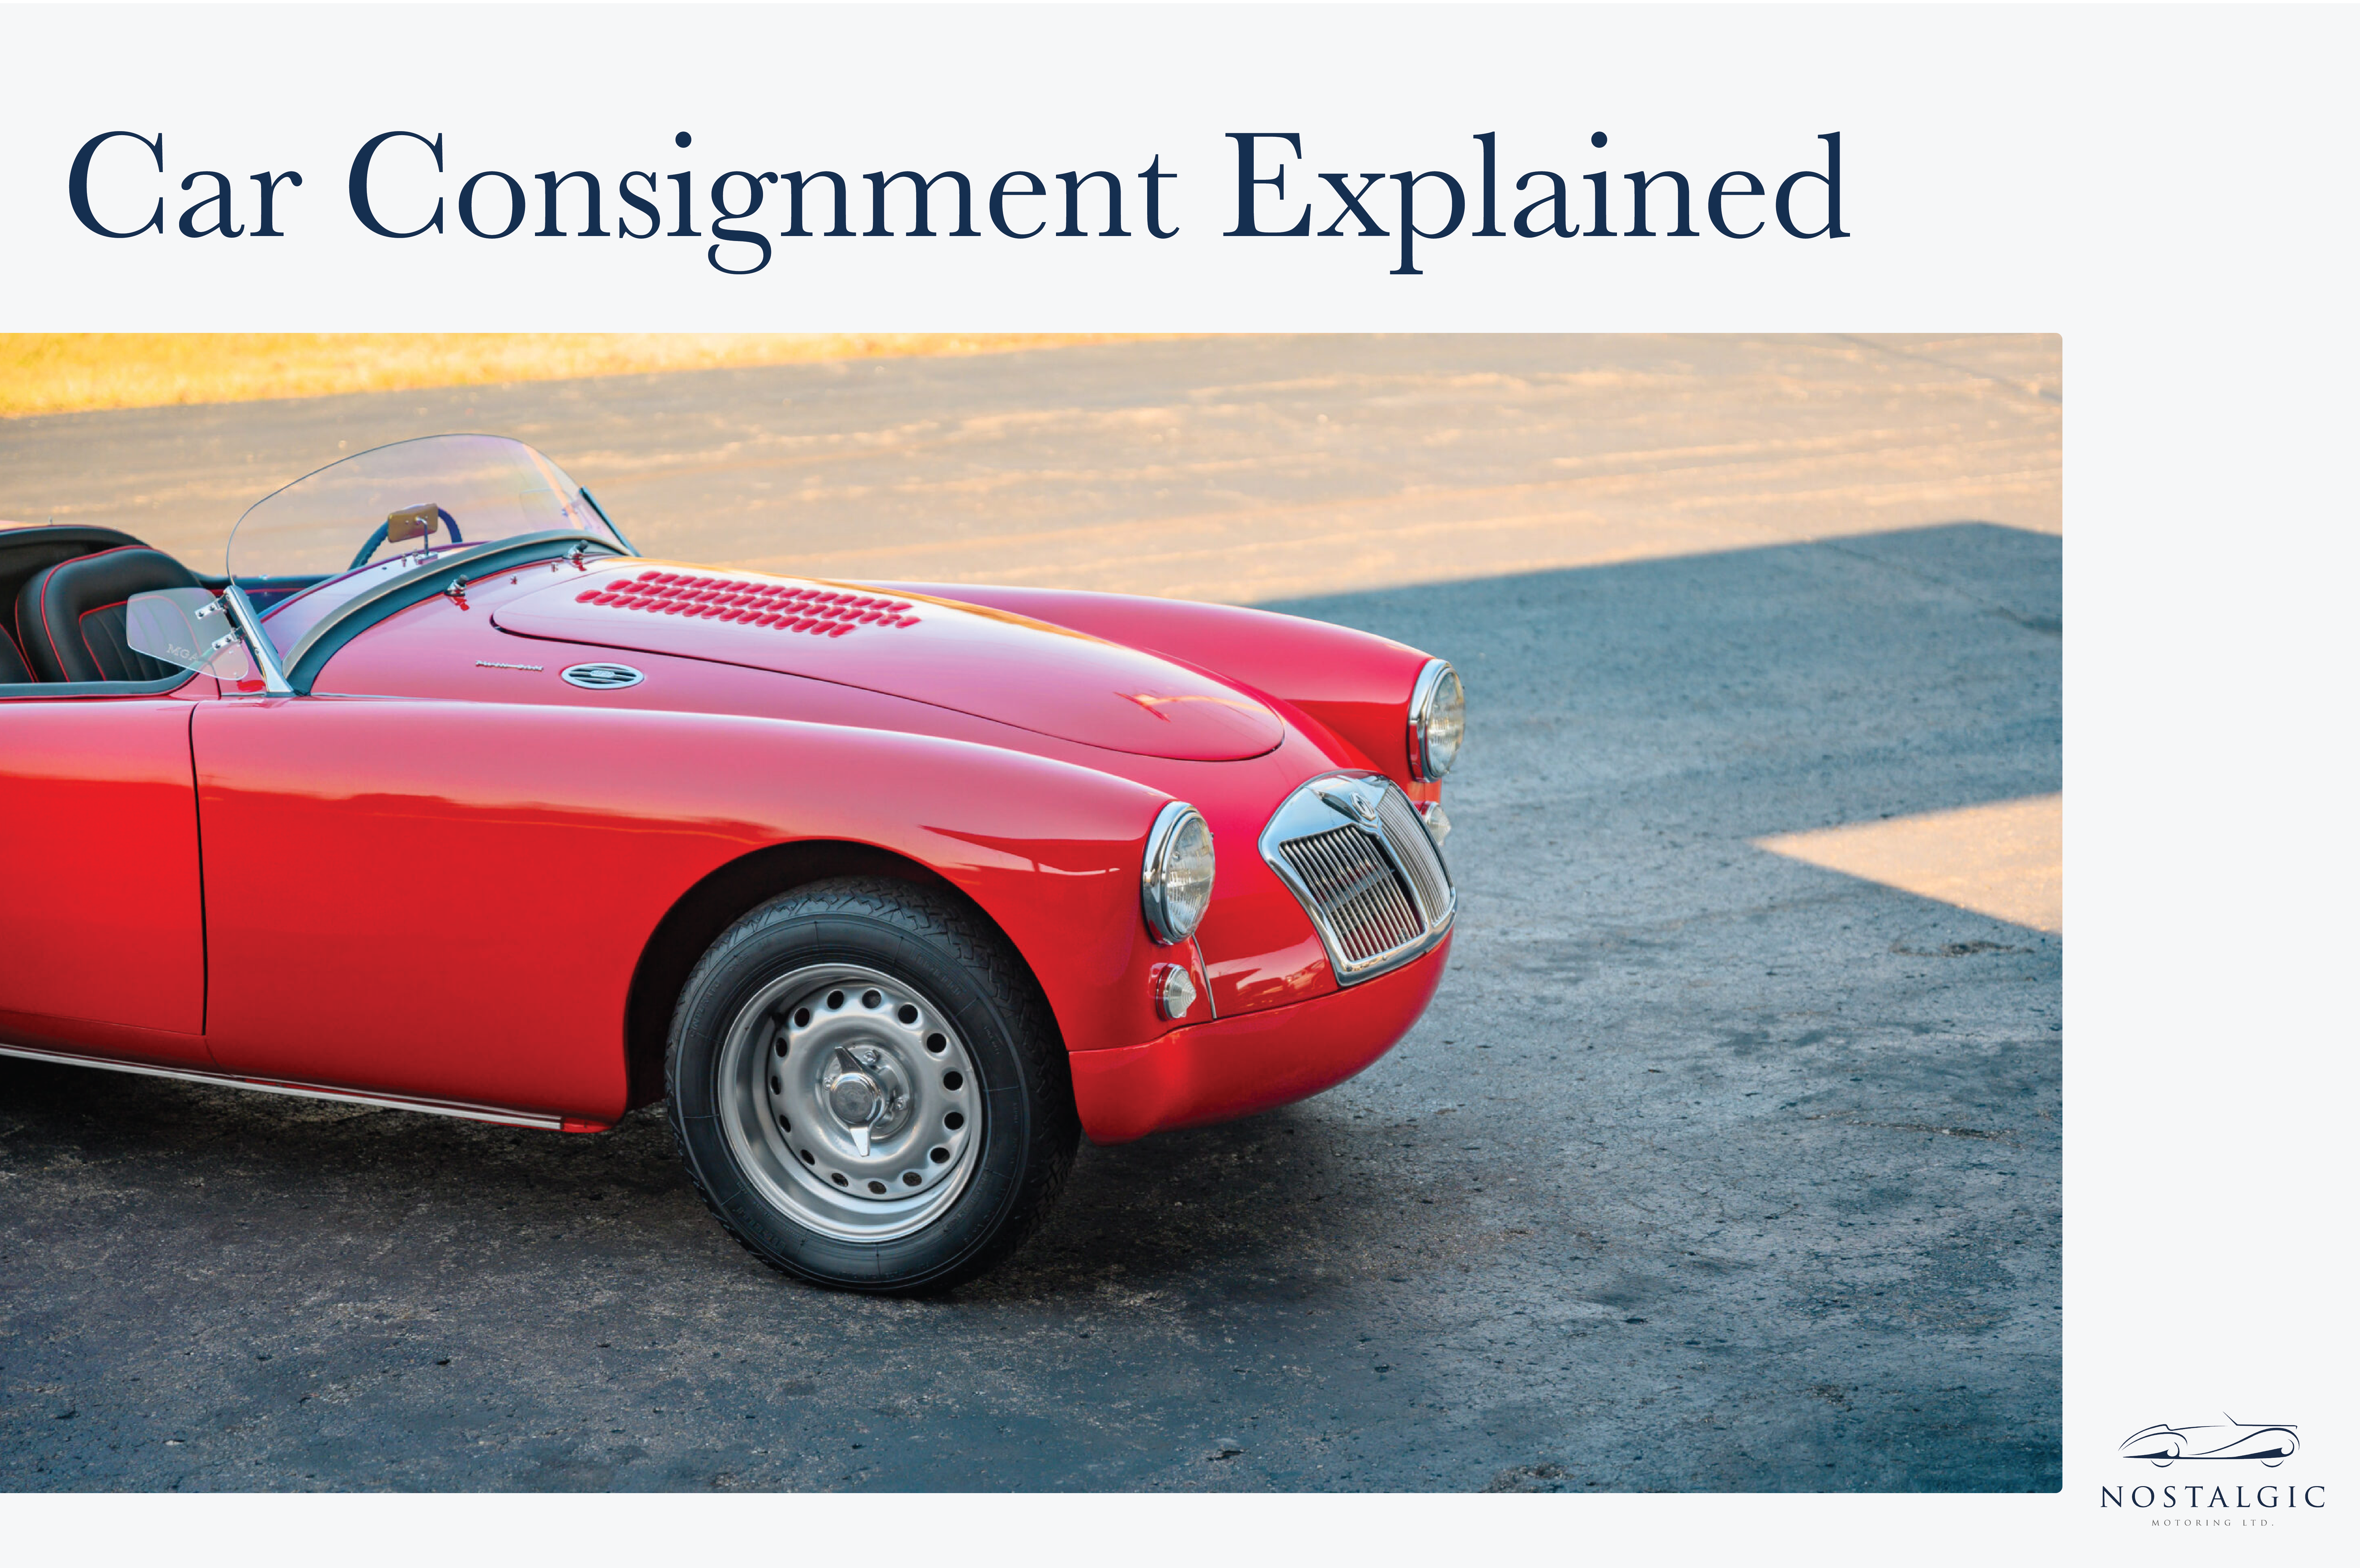 Car Consignment Explained